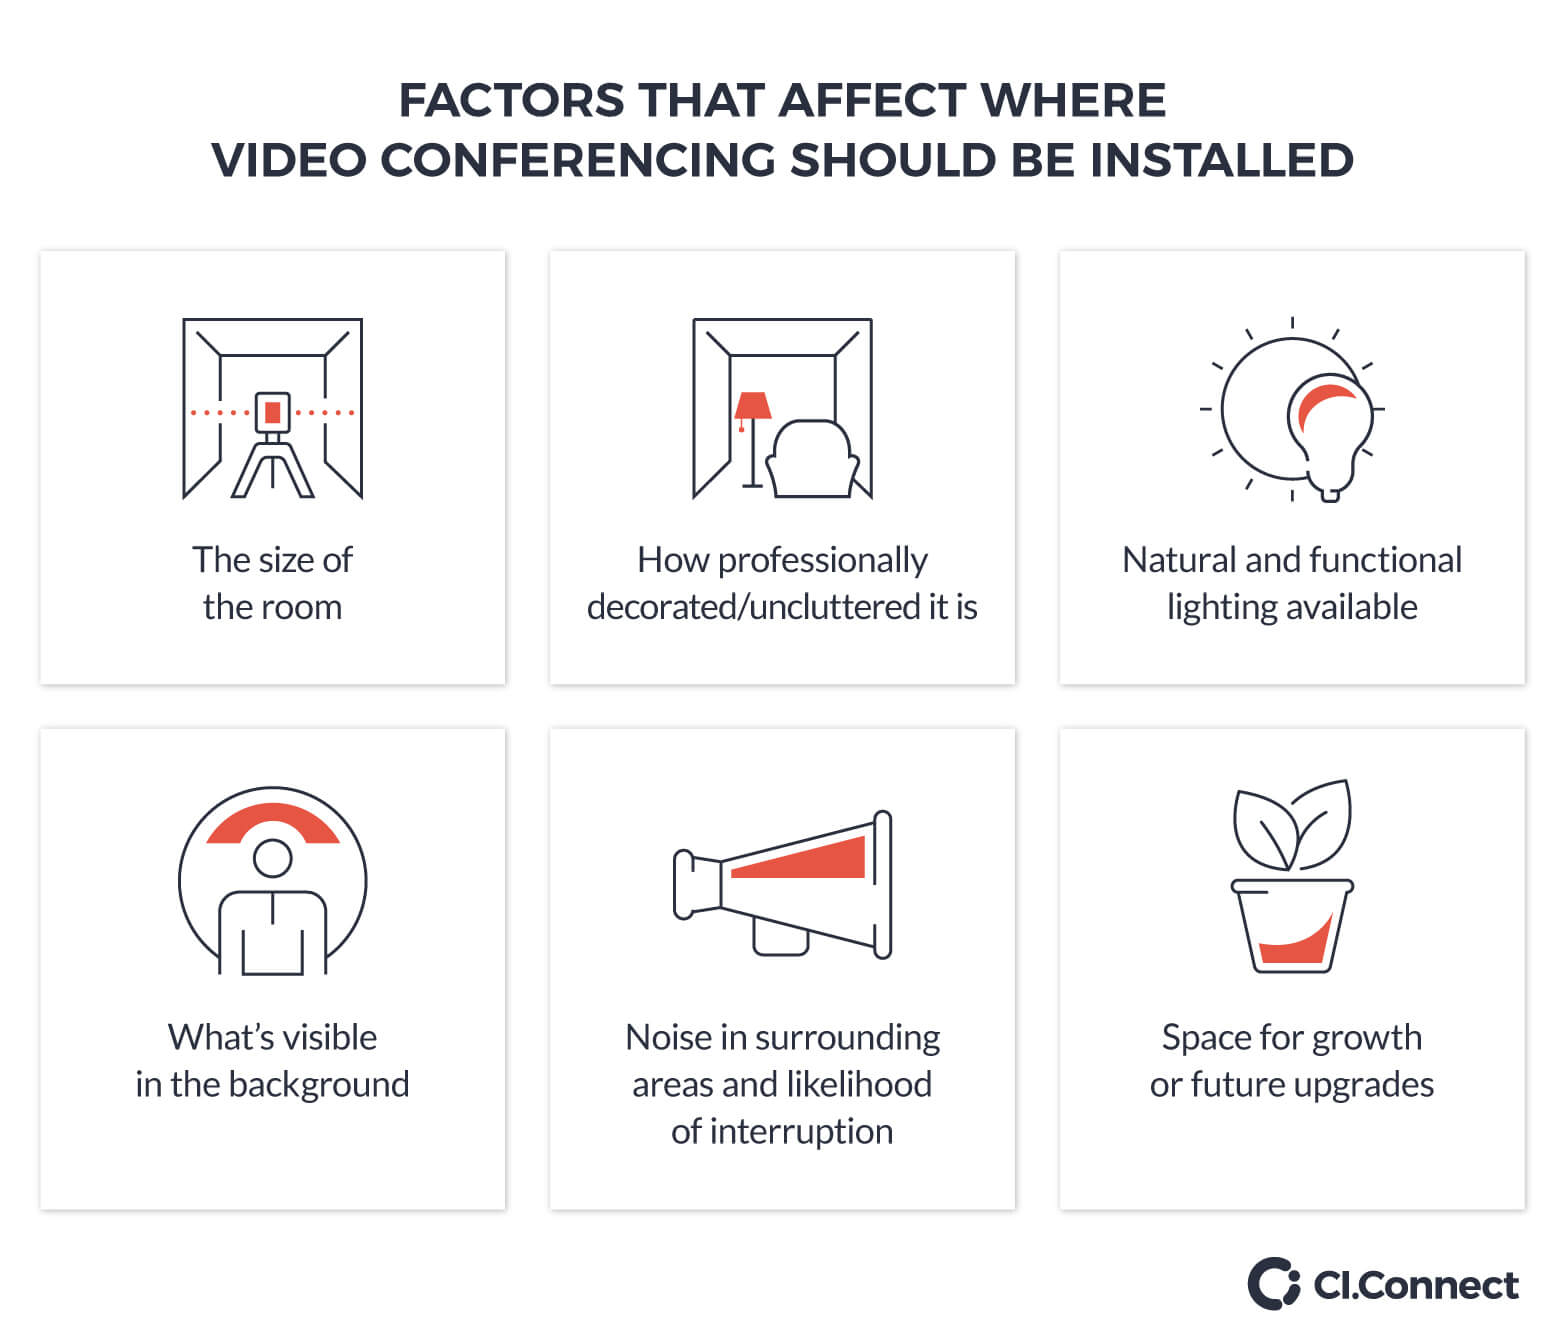 Factors that affect the location of your video conferencing